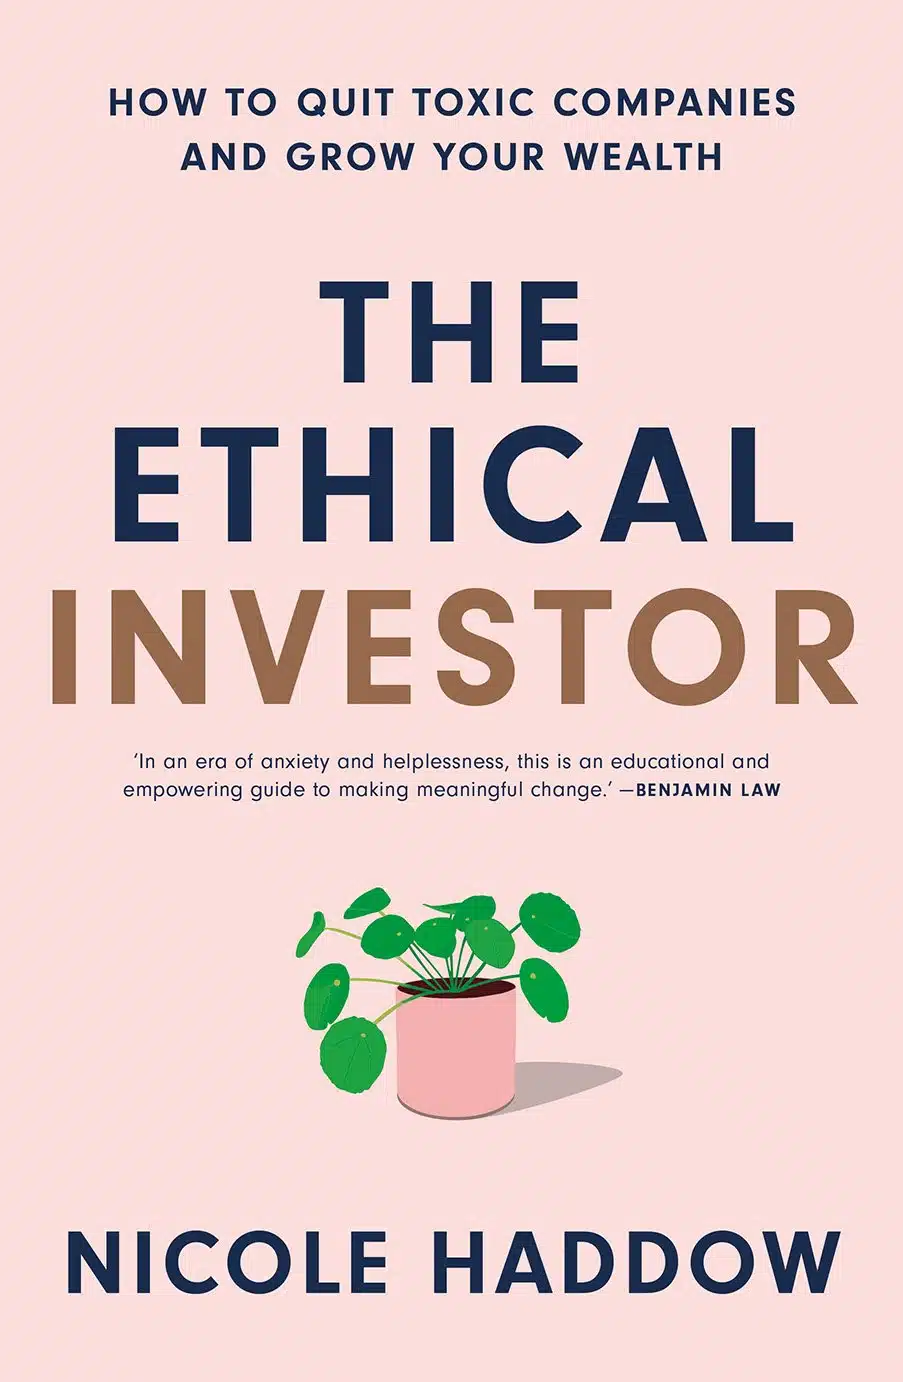 The ethical investor book